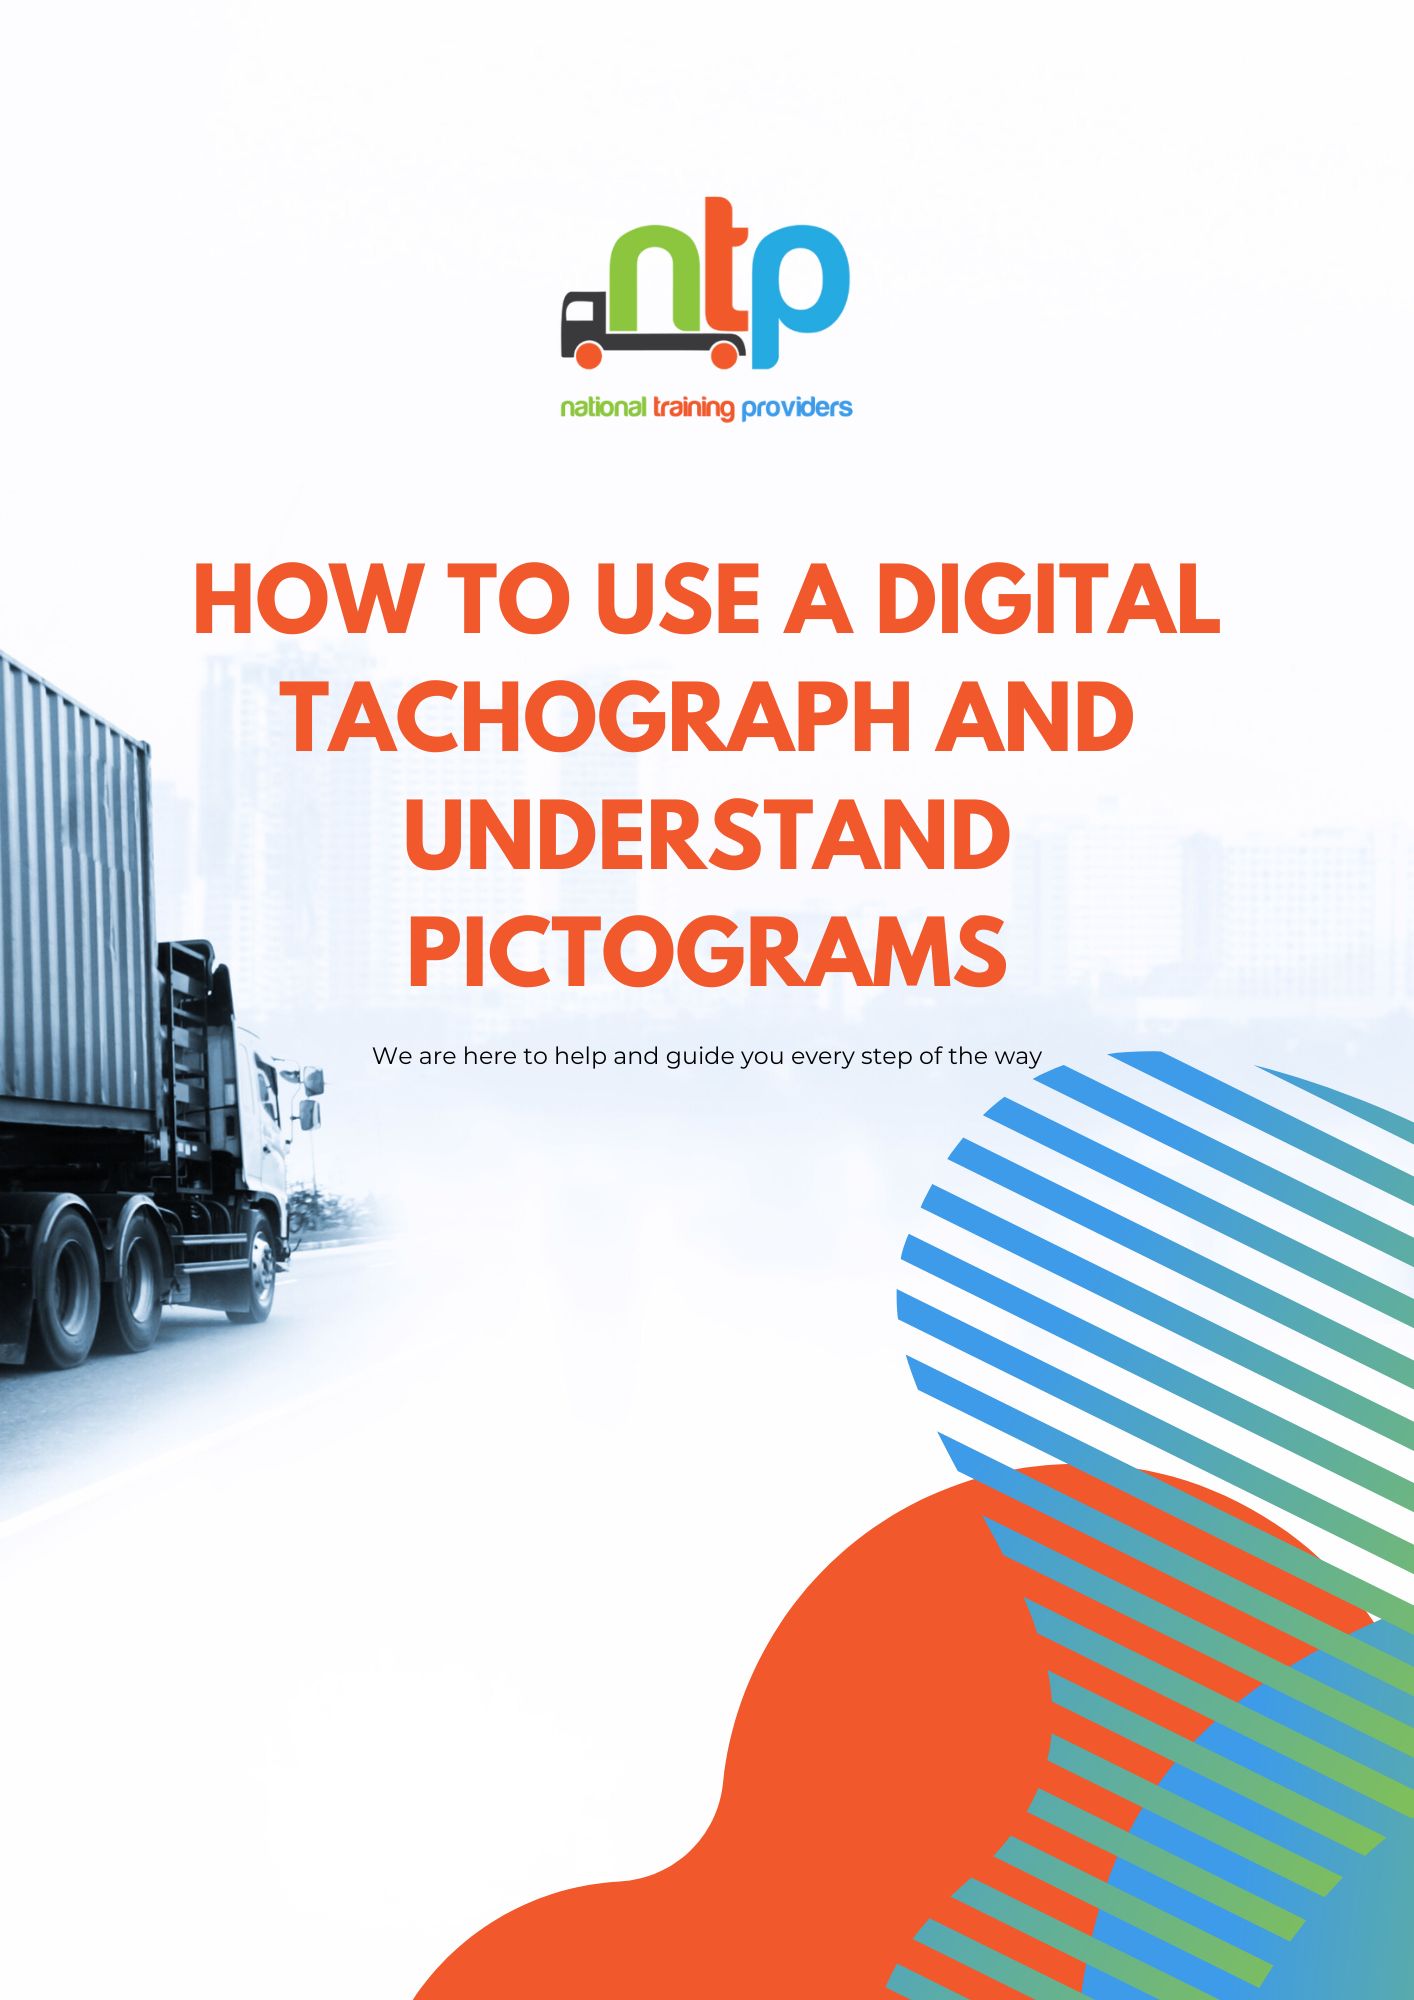 Request the digital tachograph course information guide